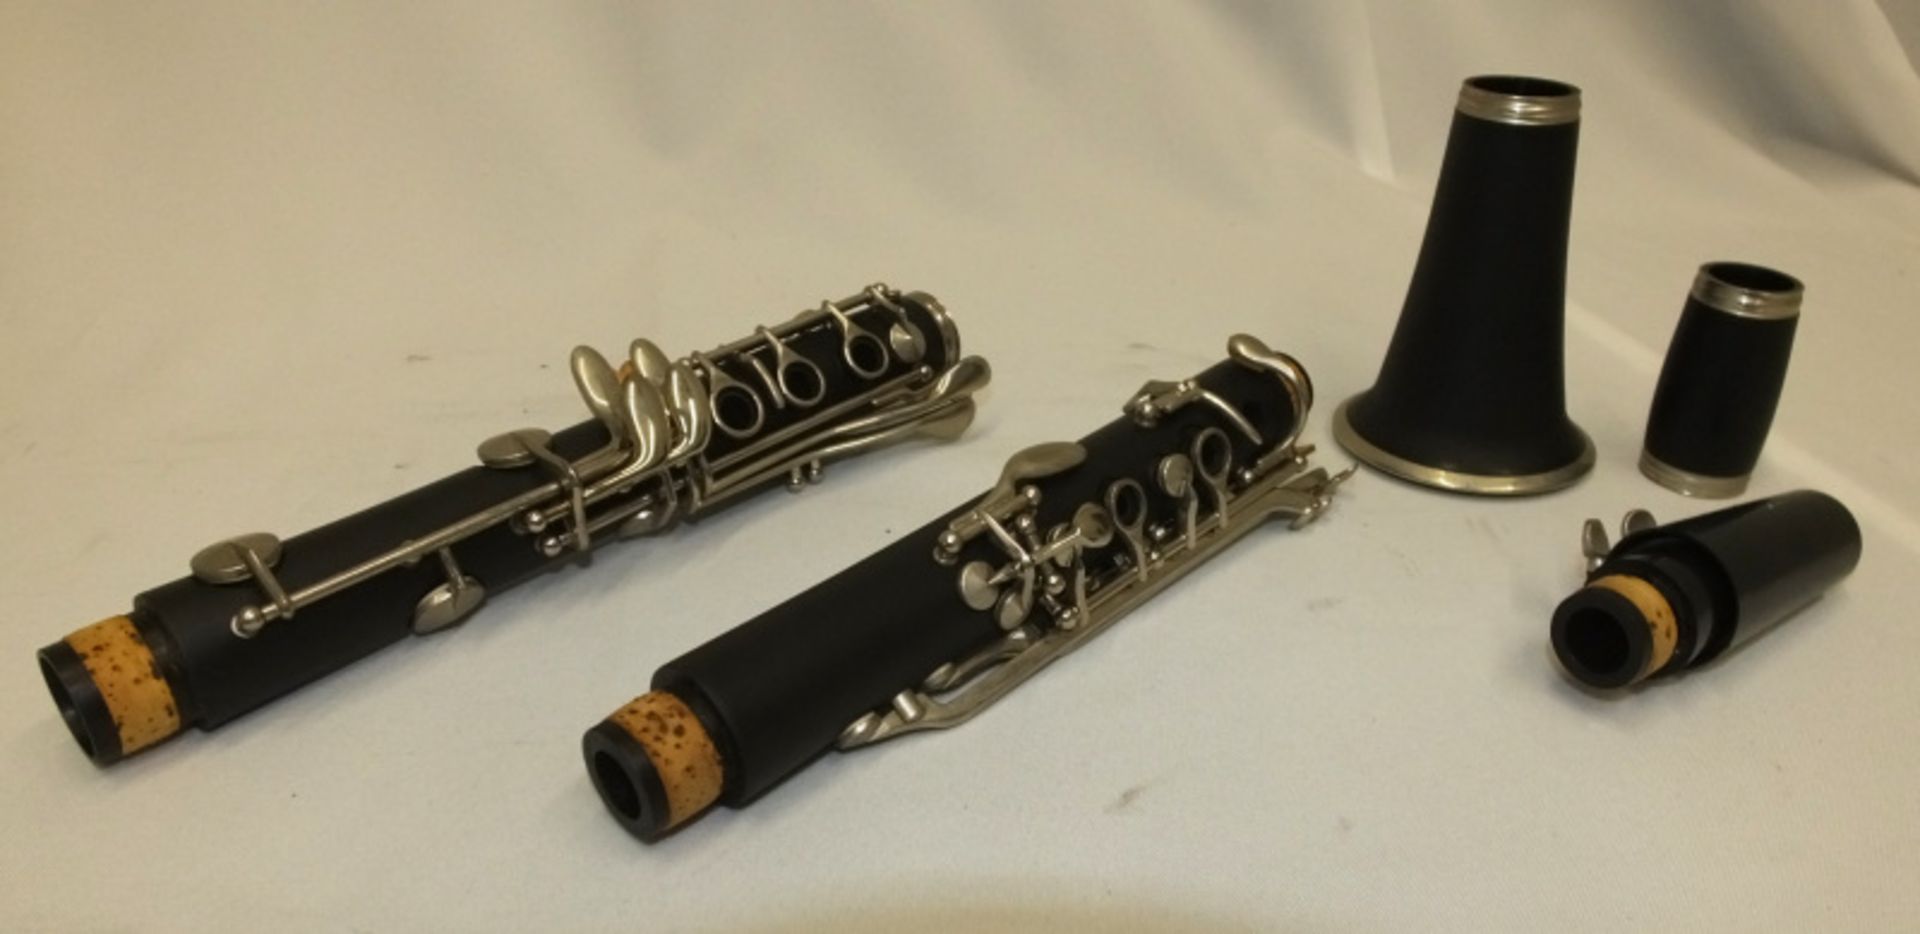 Gear 4 Music Clarinet in case - serial number BL11836 - Please check photos carefully - Image 2 of 16